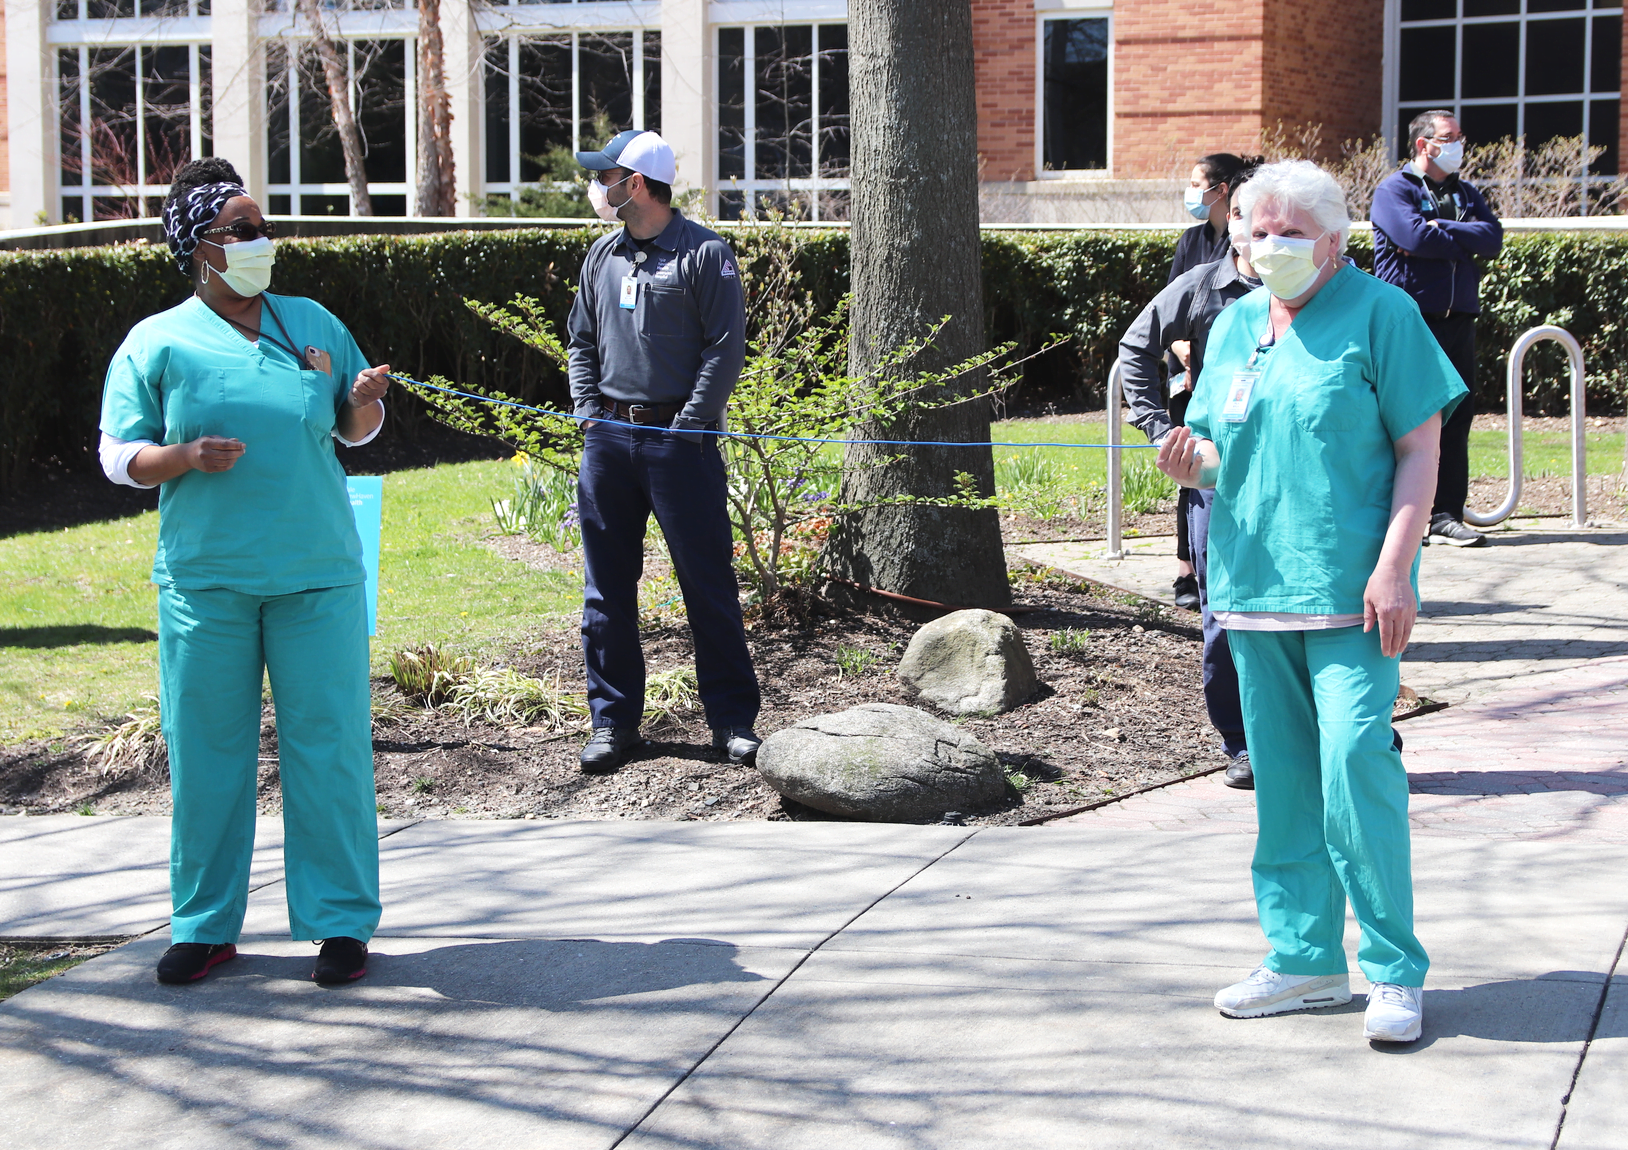 Greenwich Hospital staff demonstrate what safe social distancing of 6 ft looks like. April 15, 2020 Photo: Leslie Yager